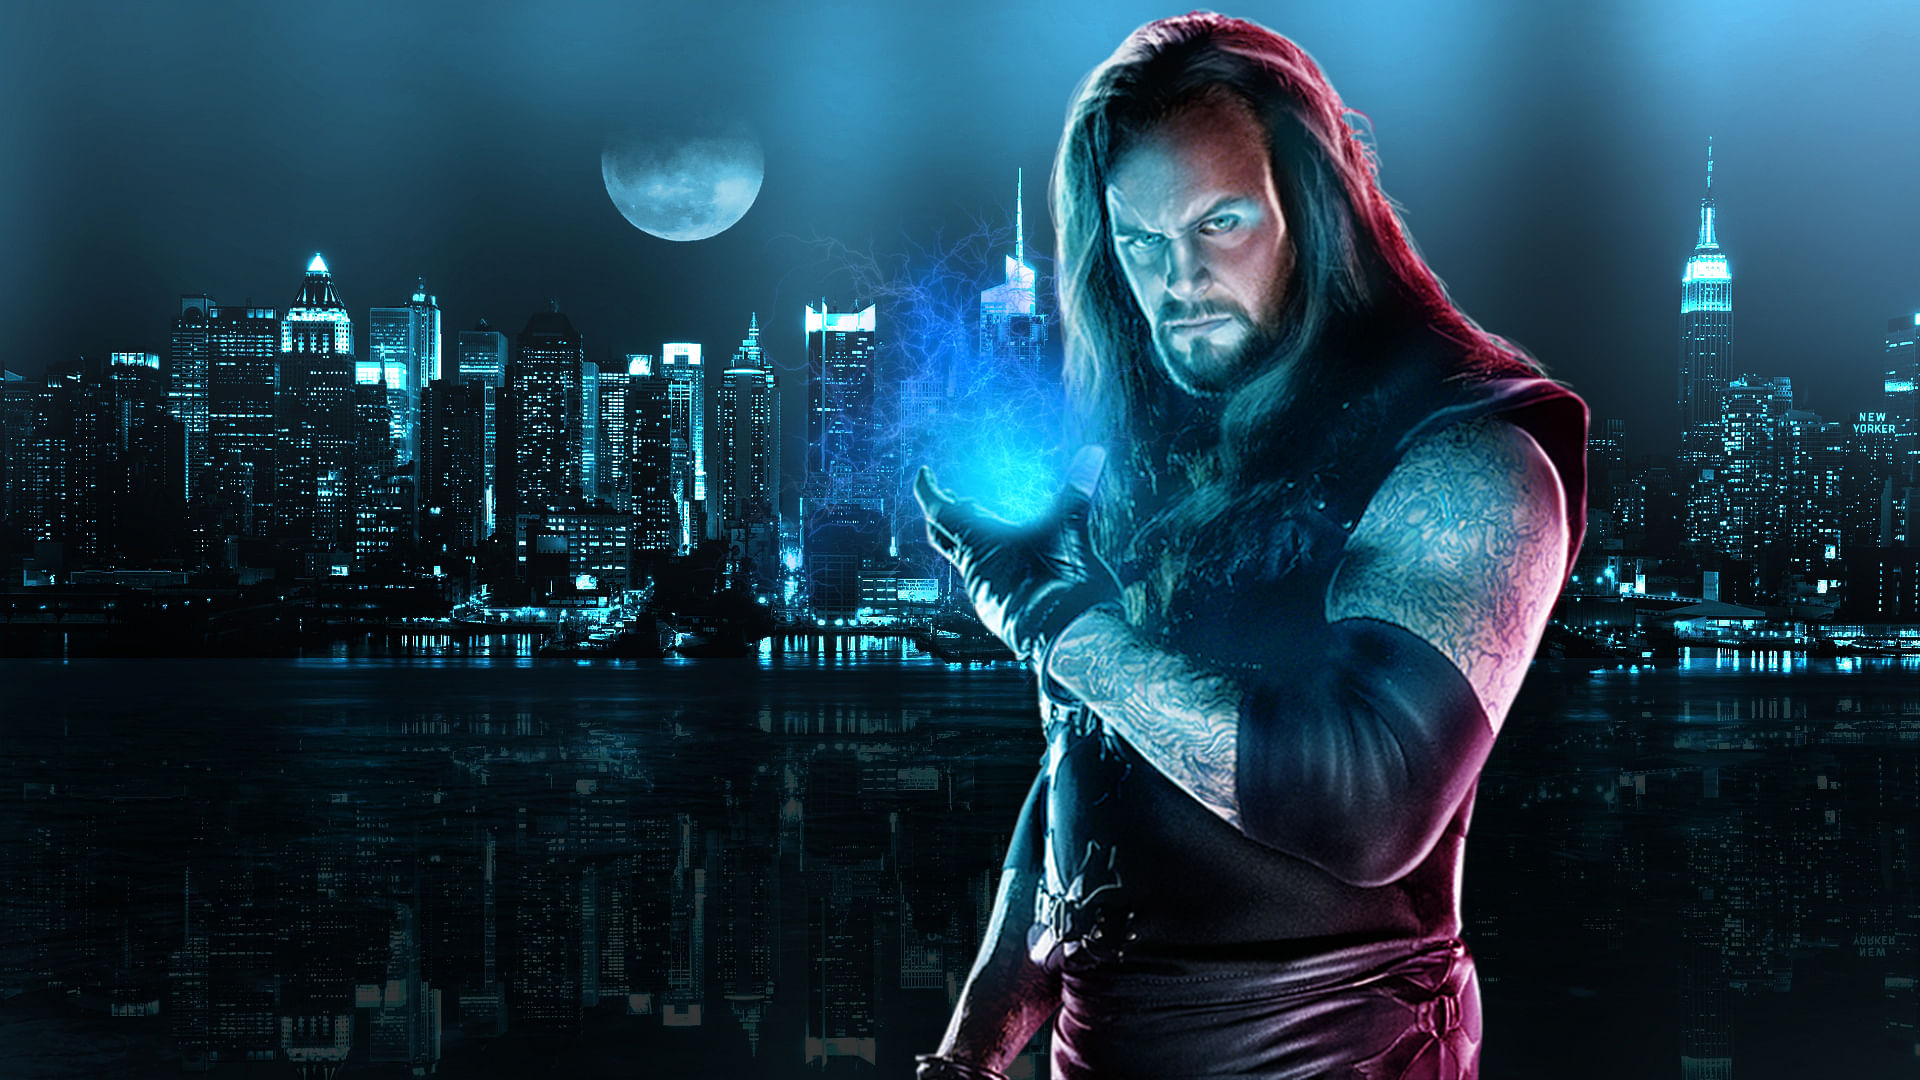 The Undertaker wallpapers for desktop download free The Undertaker  pictures and backgrounds for PC  moborg